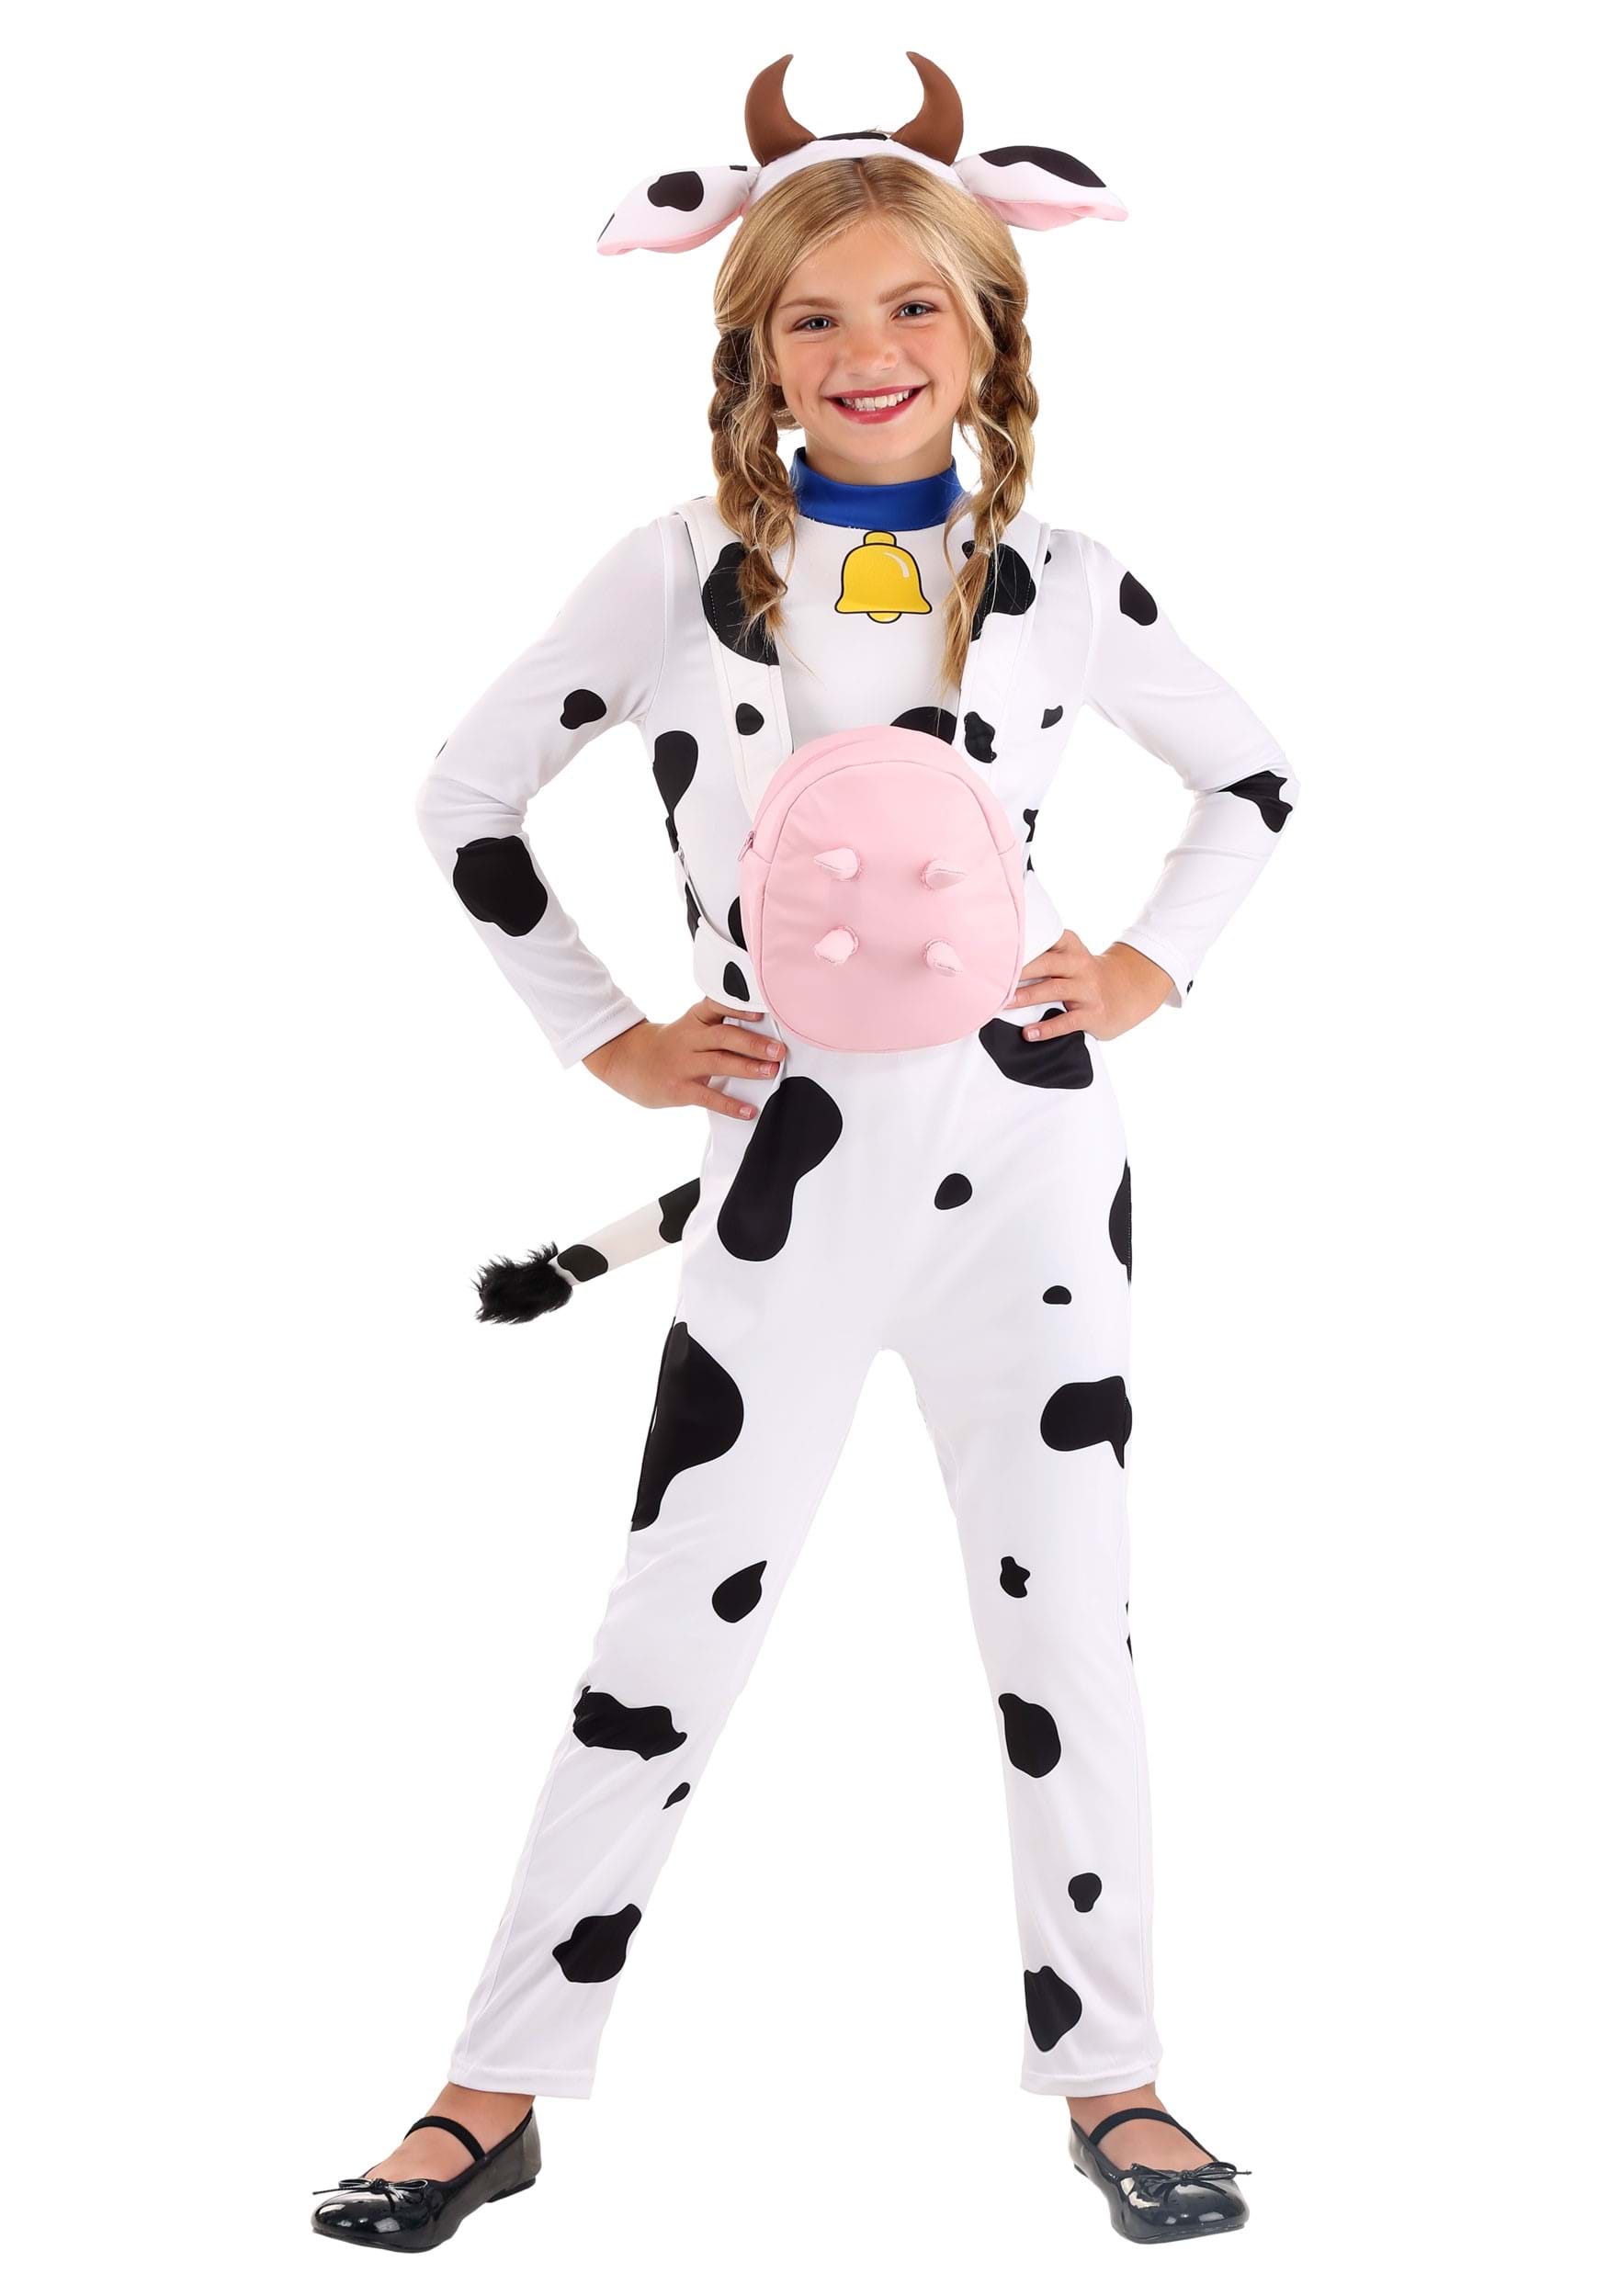 Photos - Fancy Dress Kewpie FUN Costumes Country Cow Costume for Girls | Farm Animal Costumes Black 